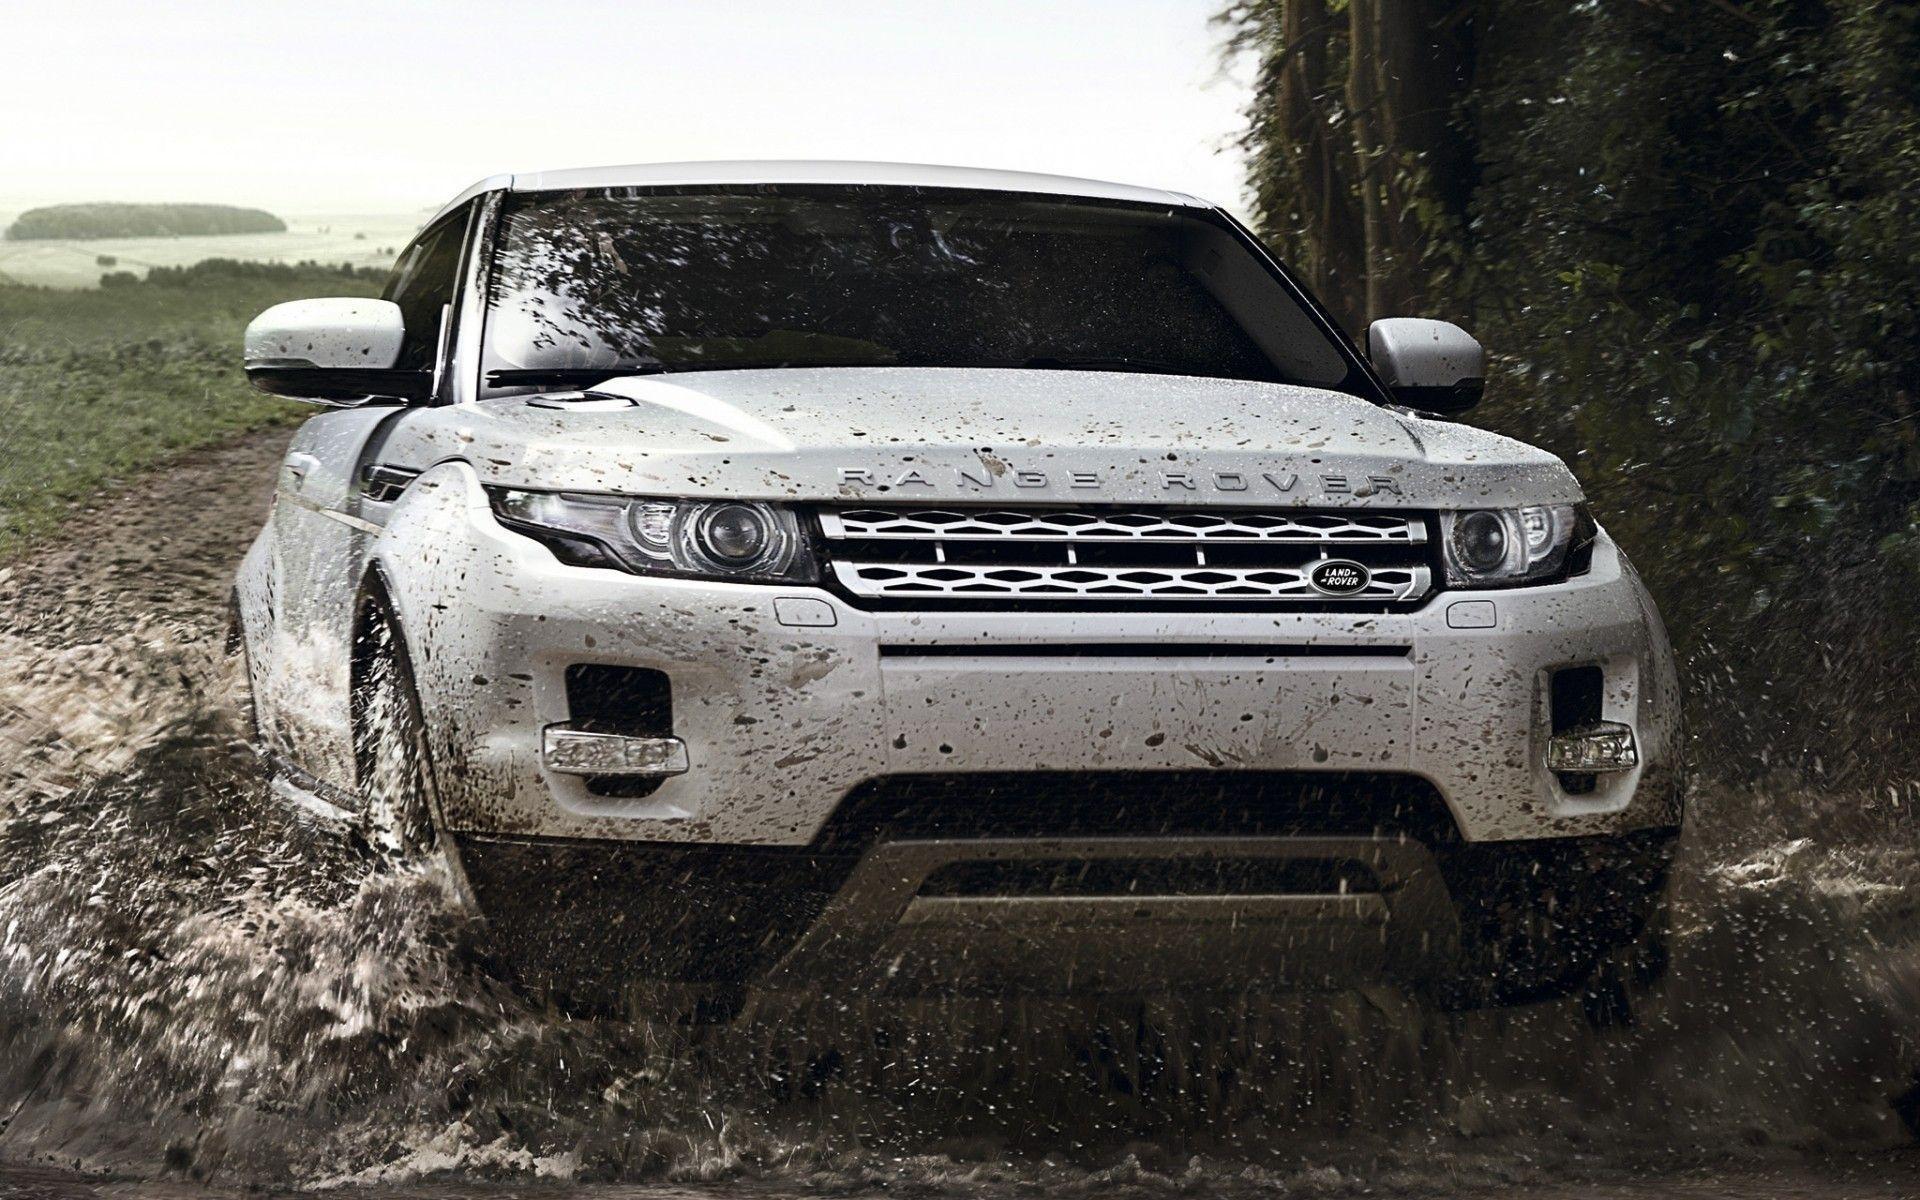 HD Range Rover Wallpapers & Range Rover Backgrounds Wallpaper For Download